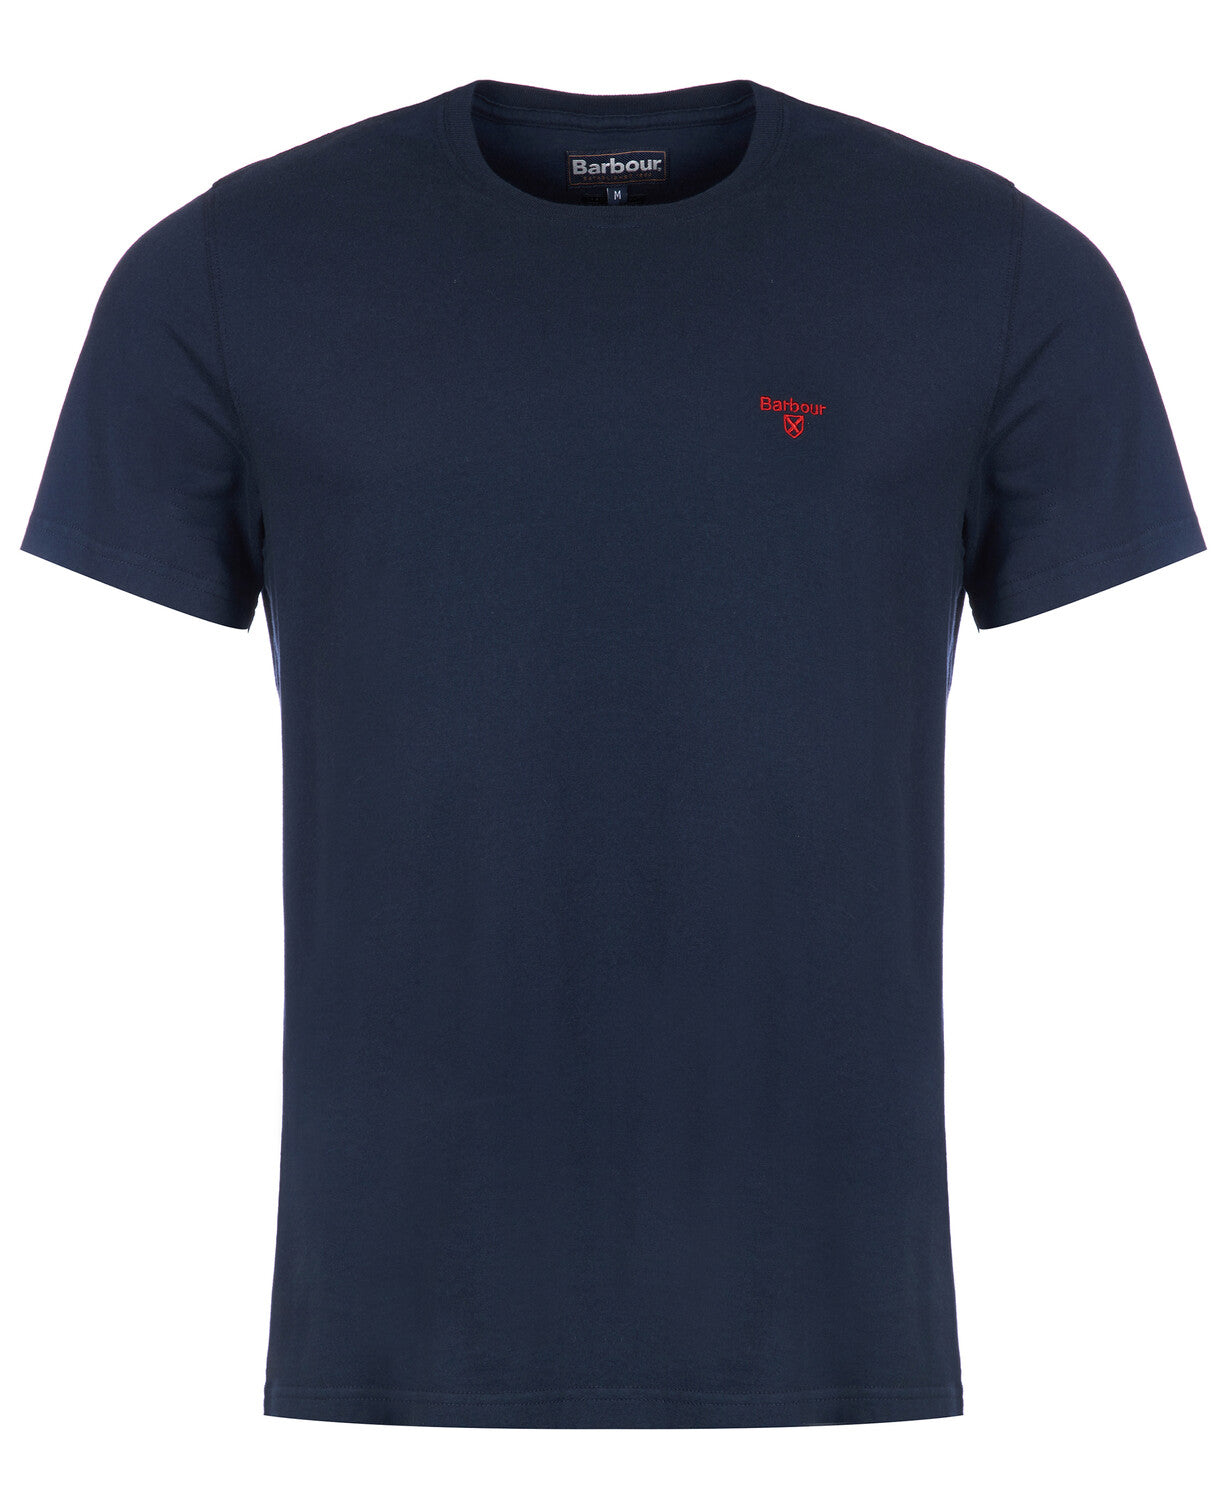 BARBOUR Essential Sports T-Shirt NAVY